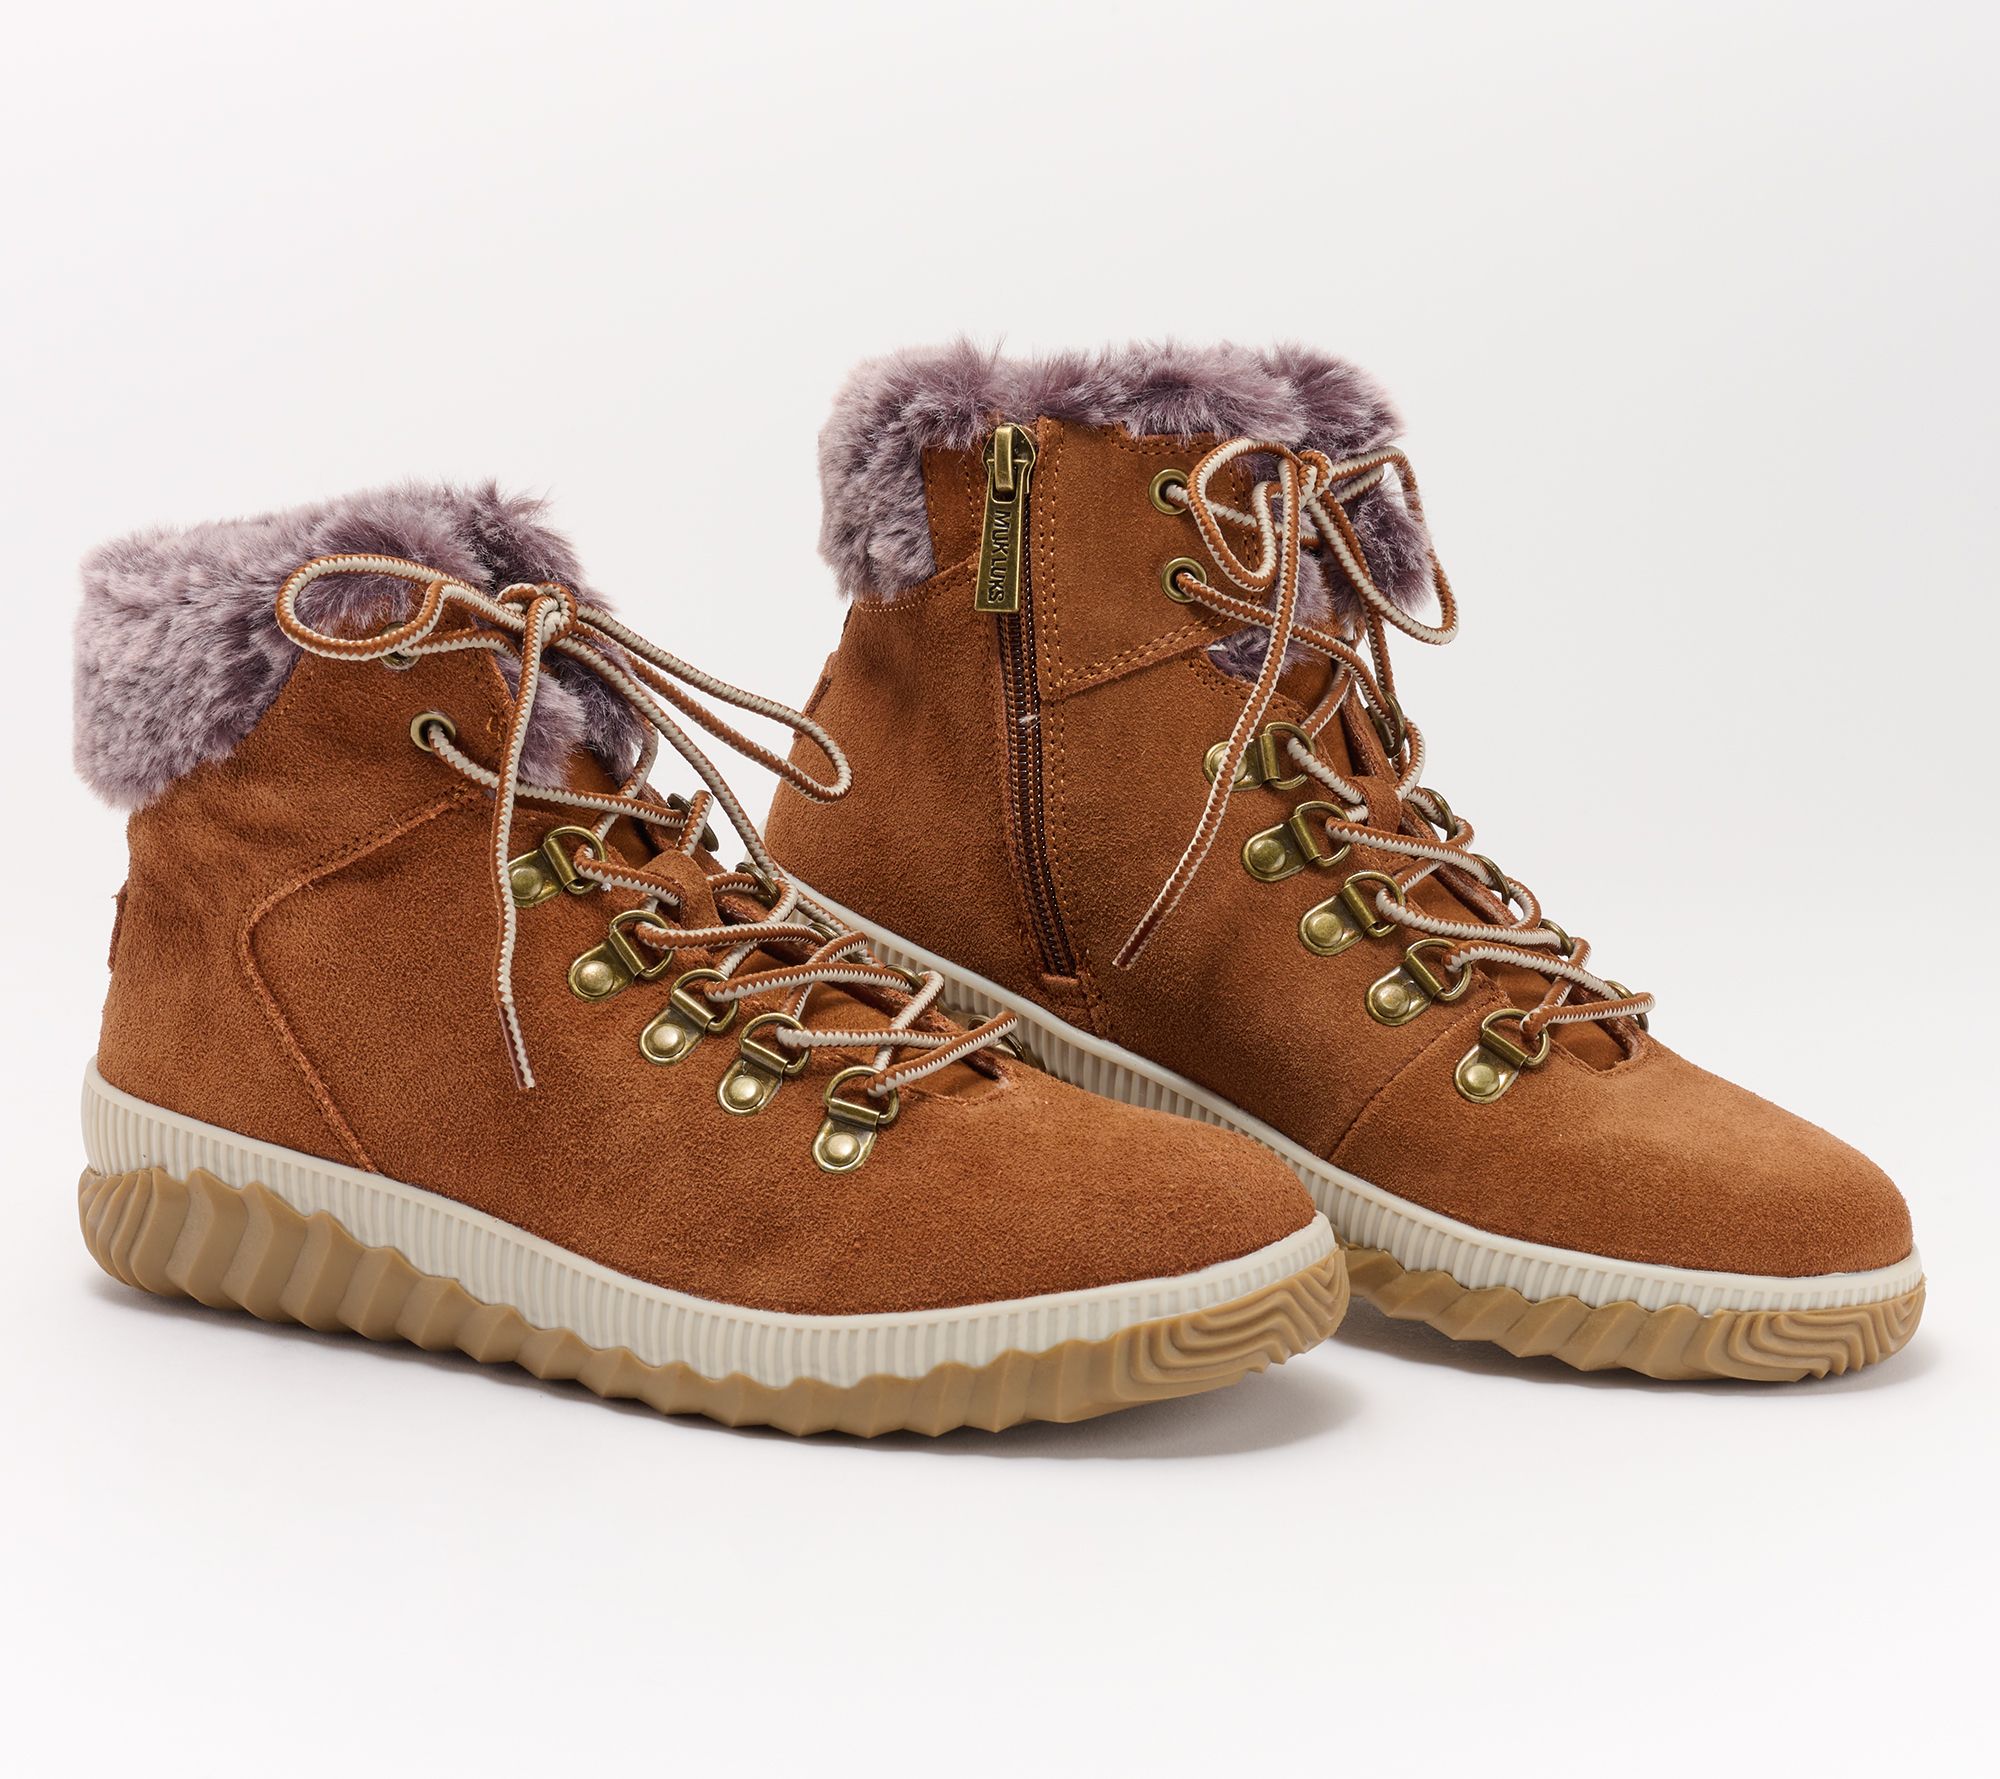 Women's MUK LUKS: Shop Cozy Footwear, Accessories and More